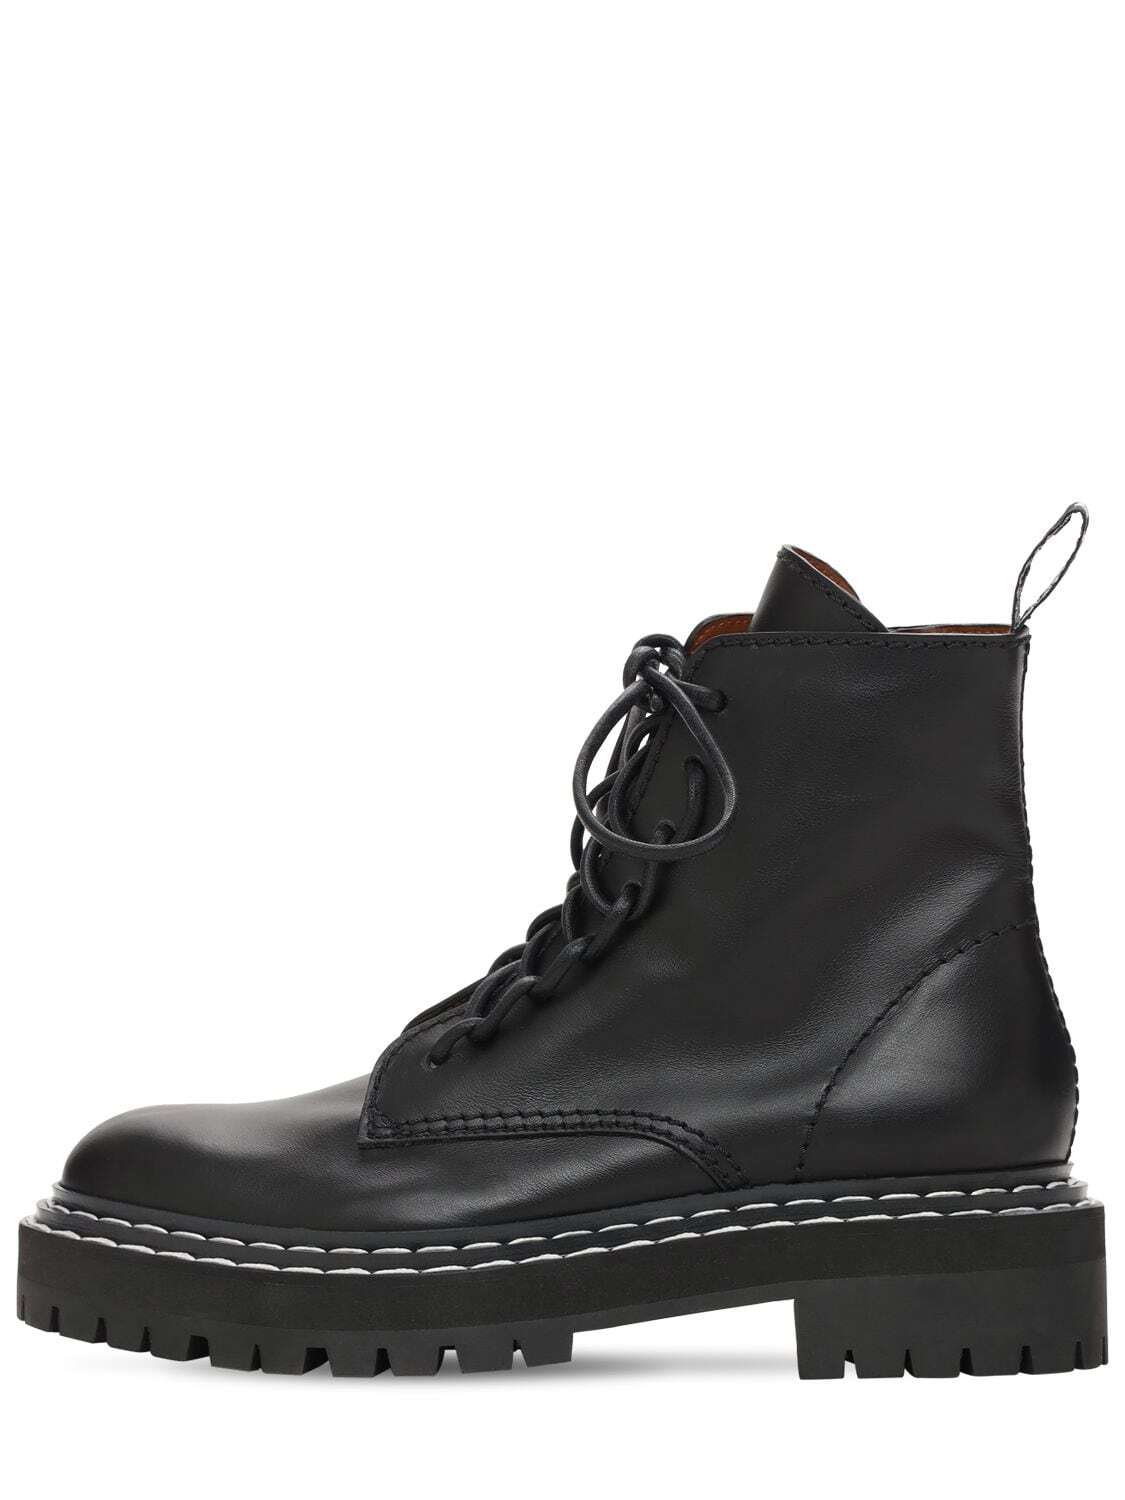 PROENZA SCHOULER 30mm Lug Sole Leather Combat Boots in black